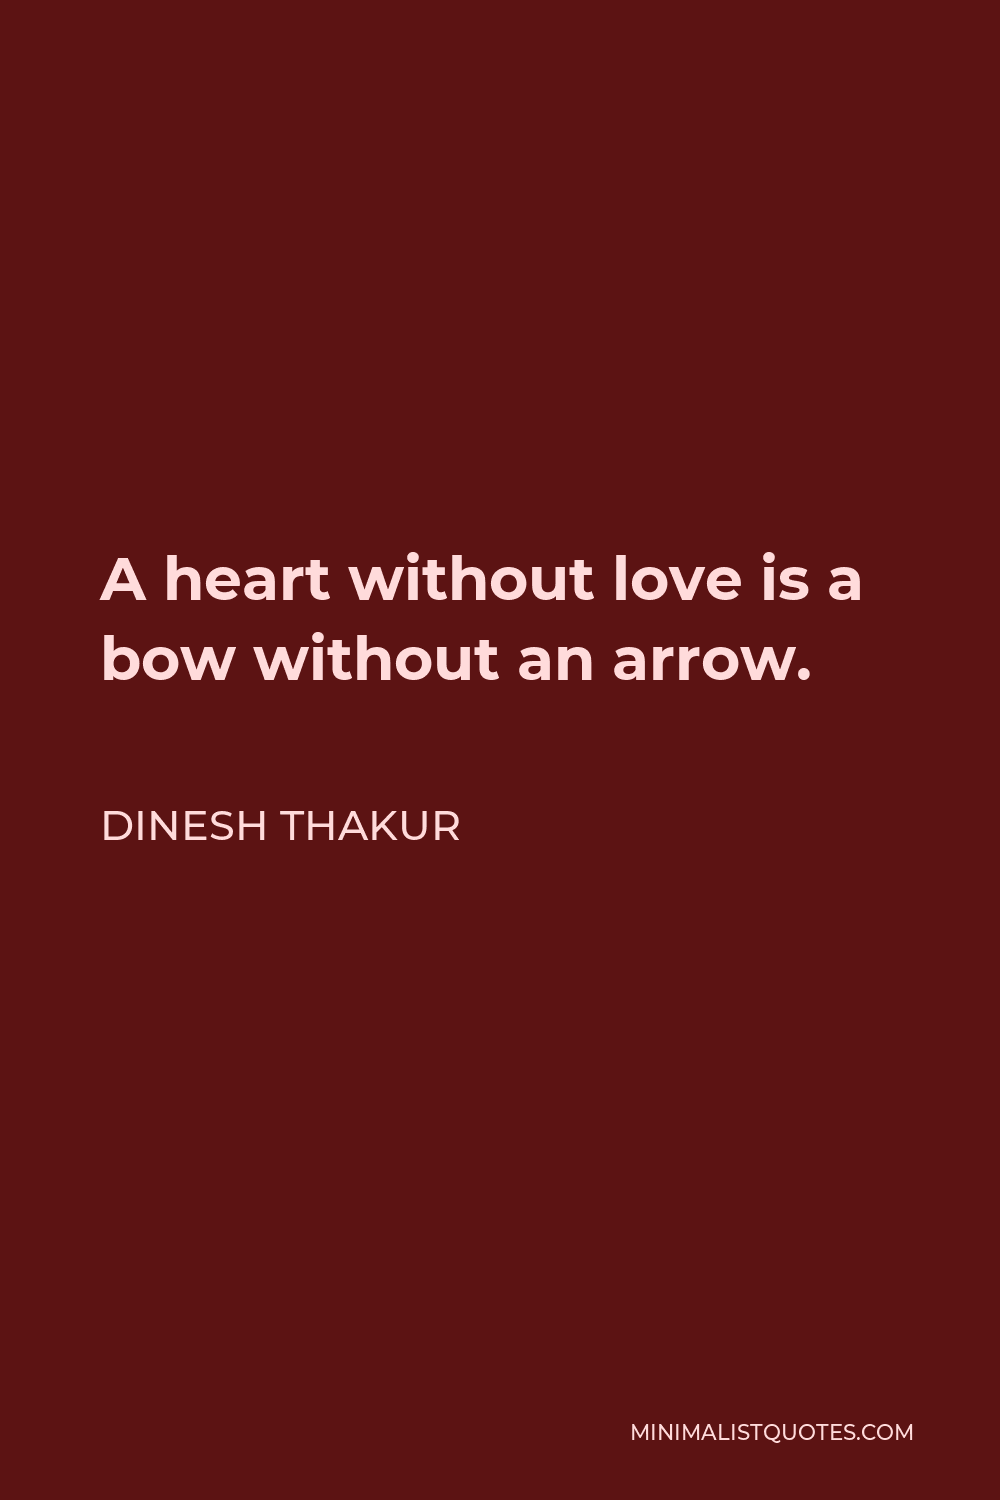 Dinesh Thakur Quote - A heart without love is a bow without an arrow.